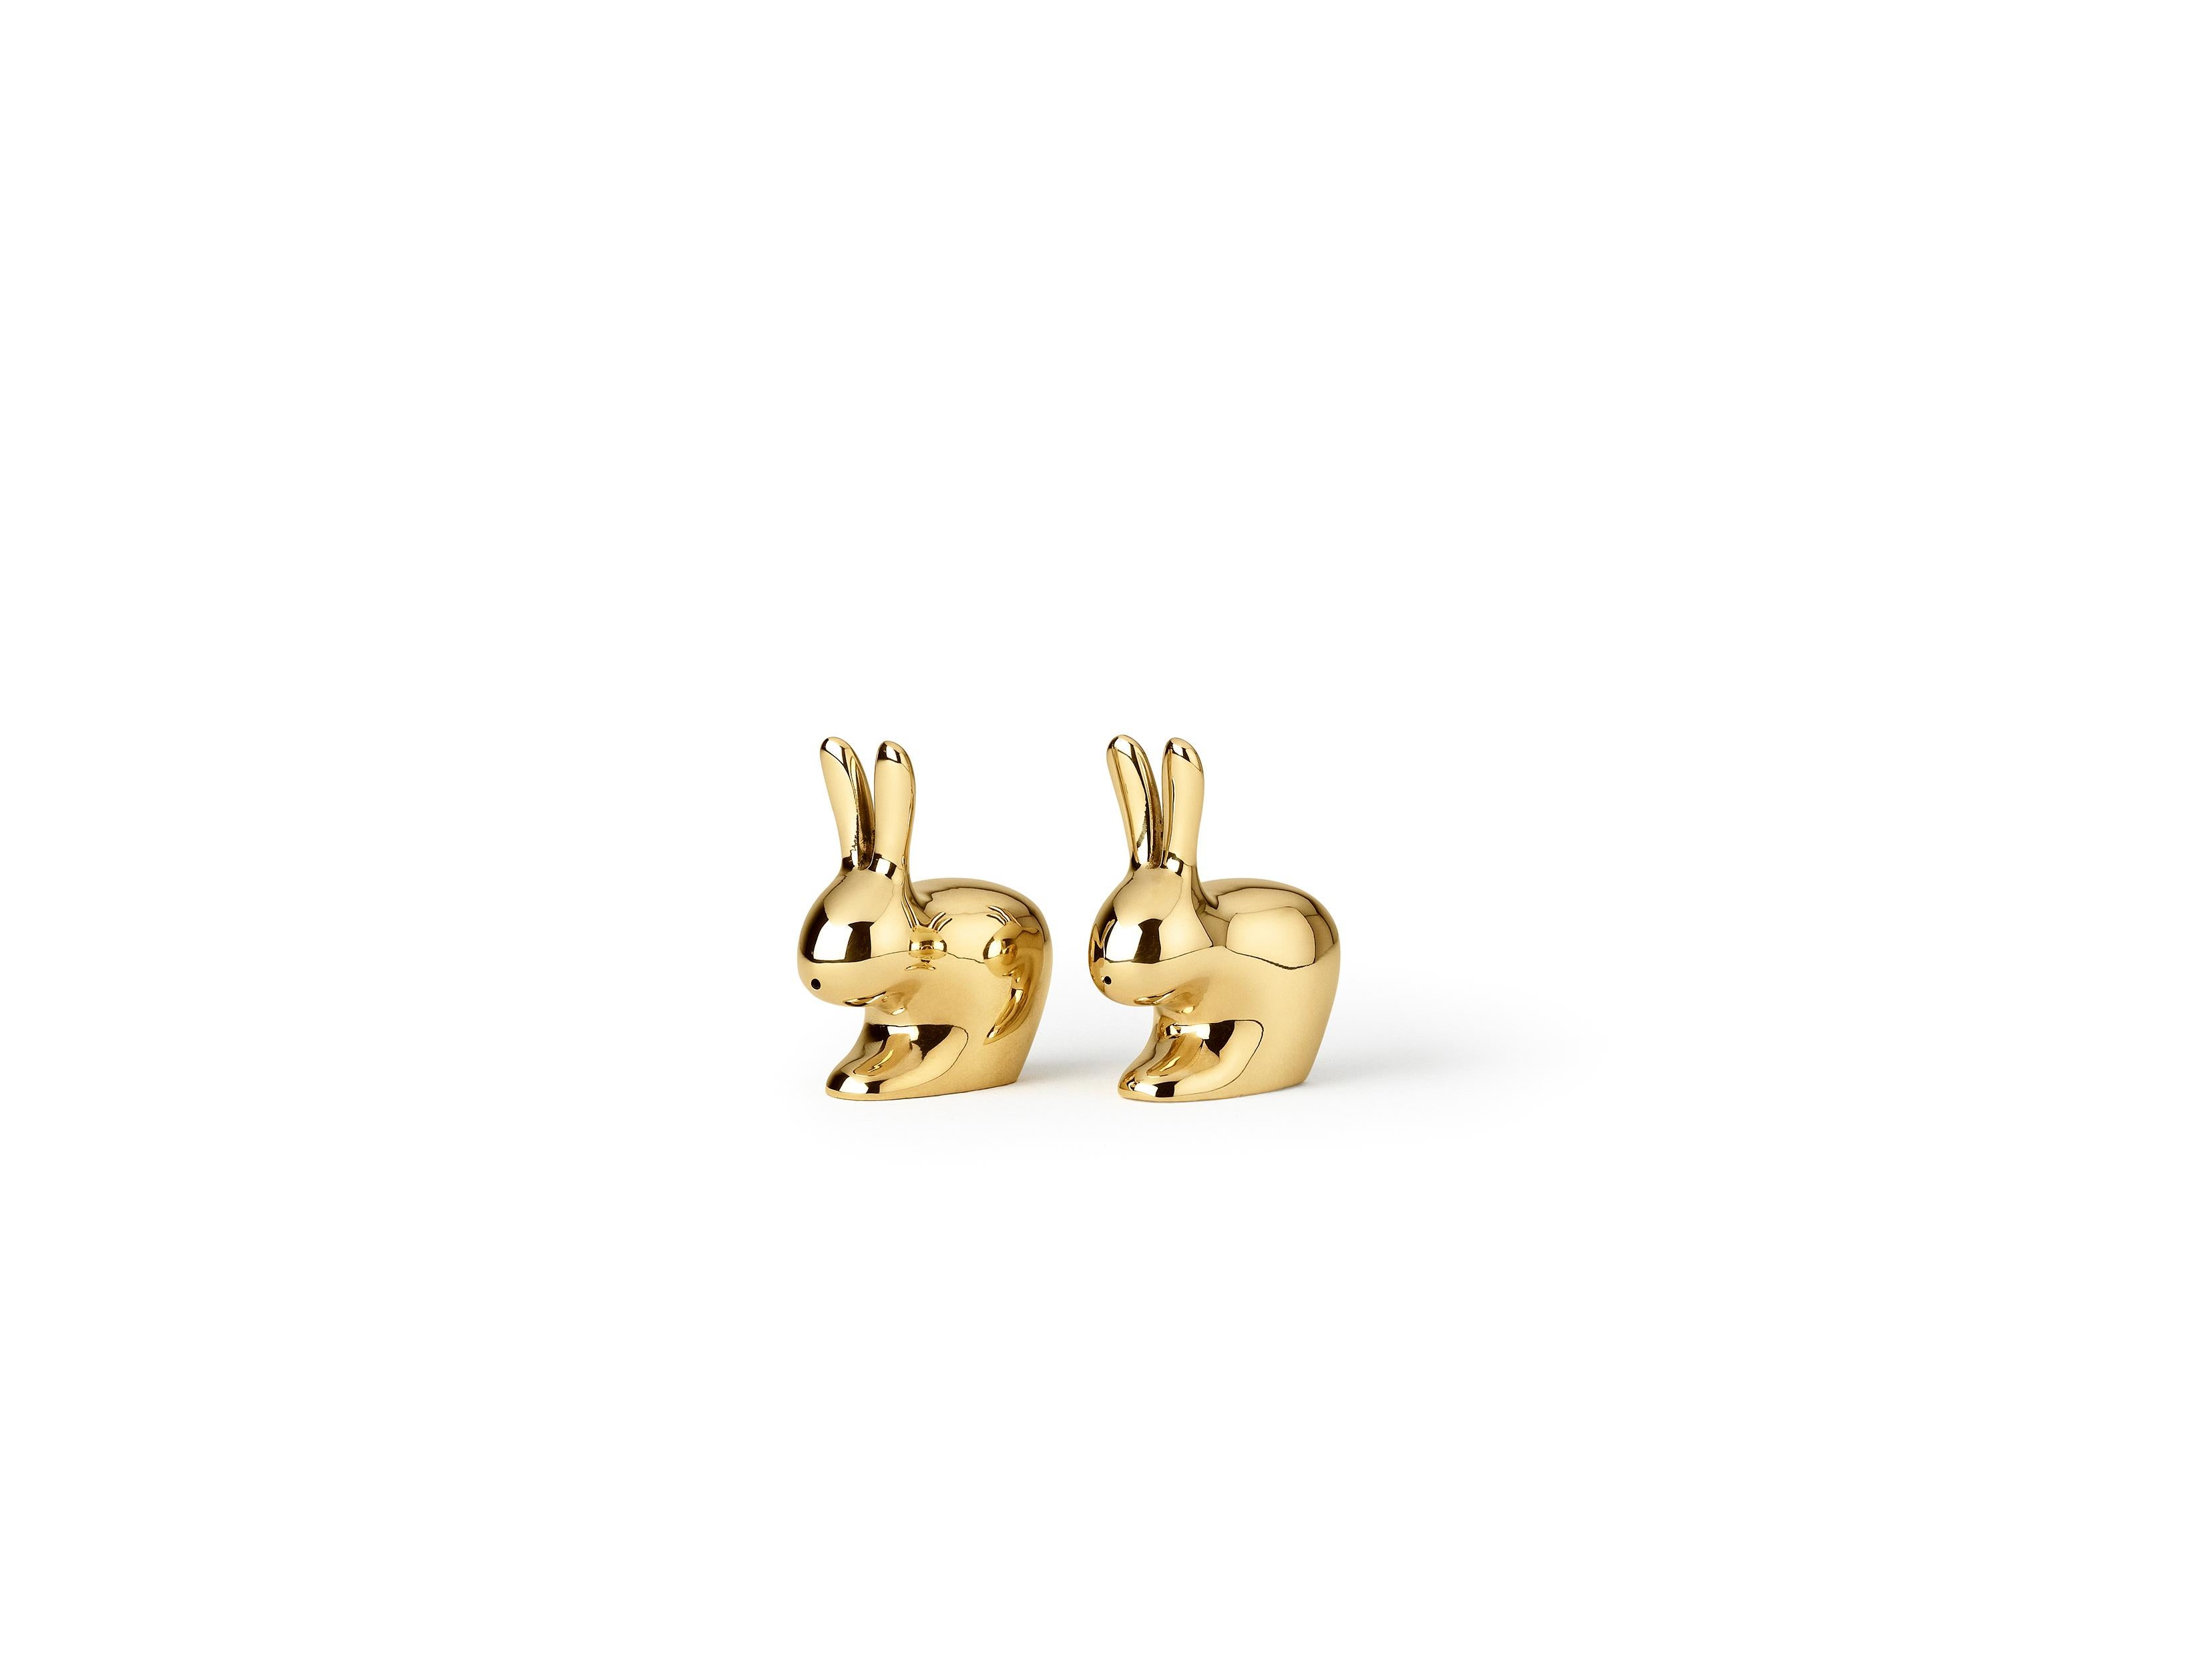 Salt and pepper in brass with PVD treatment
The rabbit is the latest iconic object I have designed.
For Ghidini it has turned into a family of precious metal objects: salt and pepper, paperweight and doorstopper. The rabbit is a gentle animal,